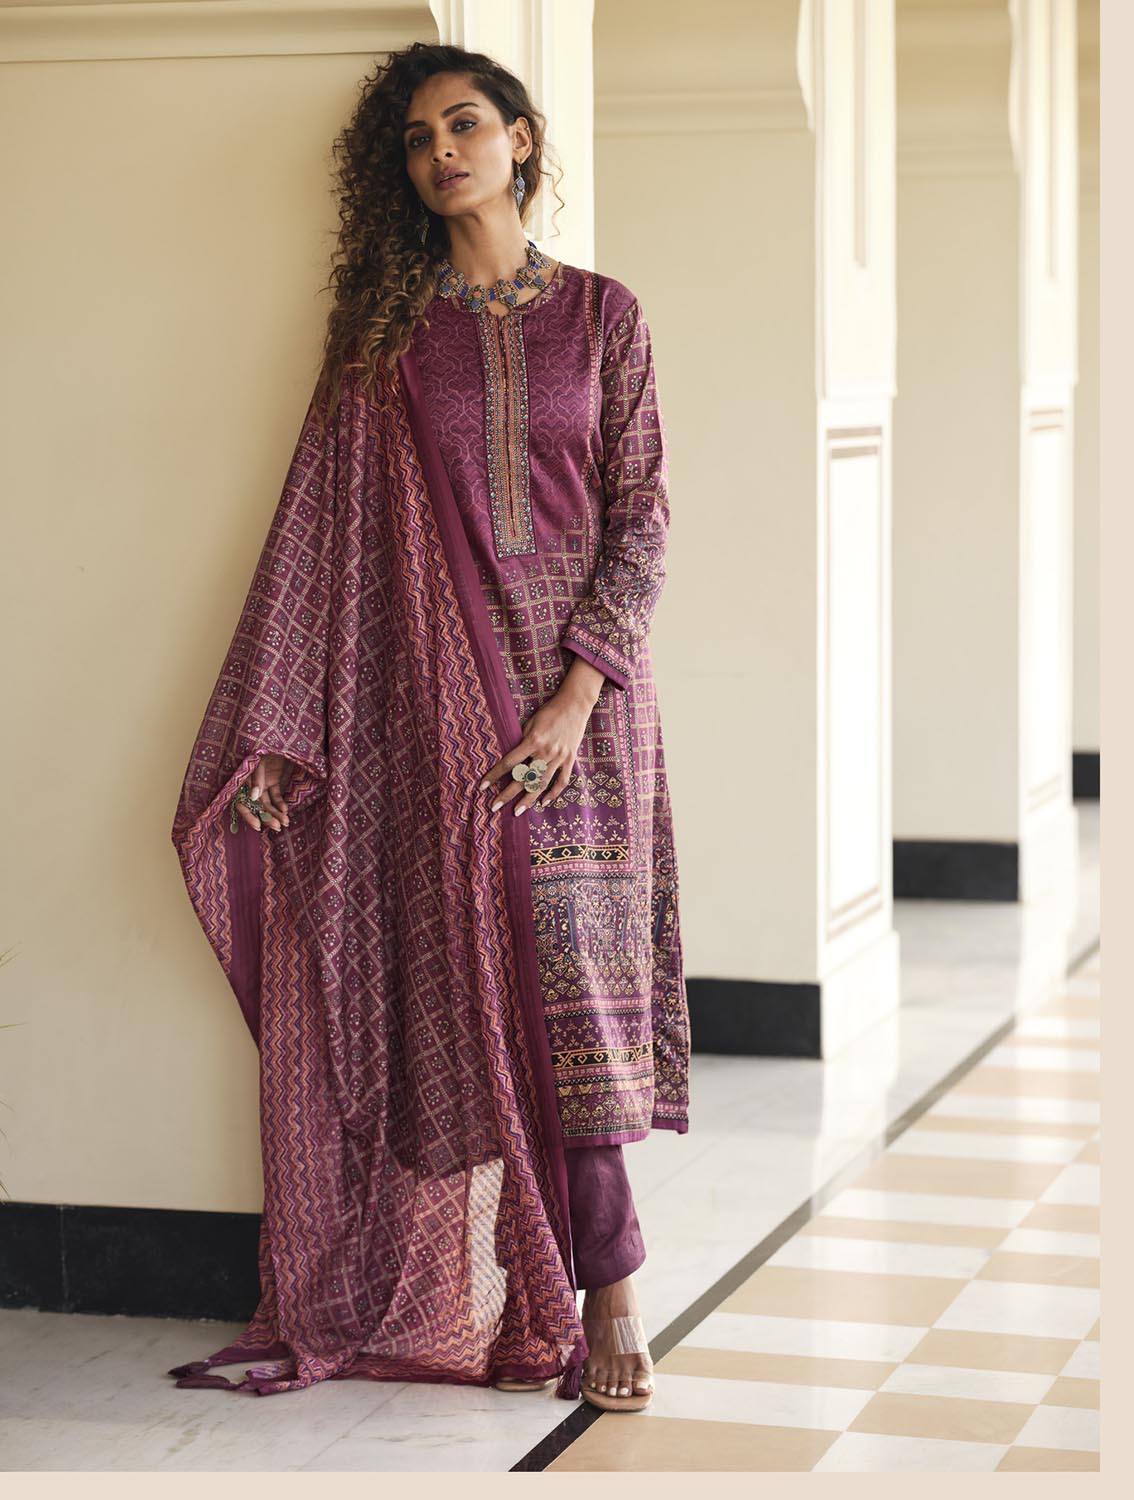 Sadhana Cotton Silk Embroidered Women Unstitched Suit Material